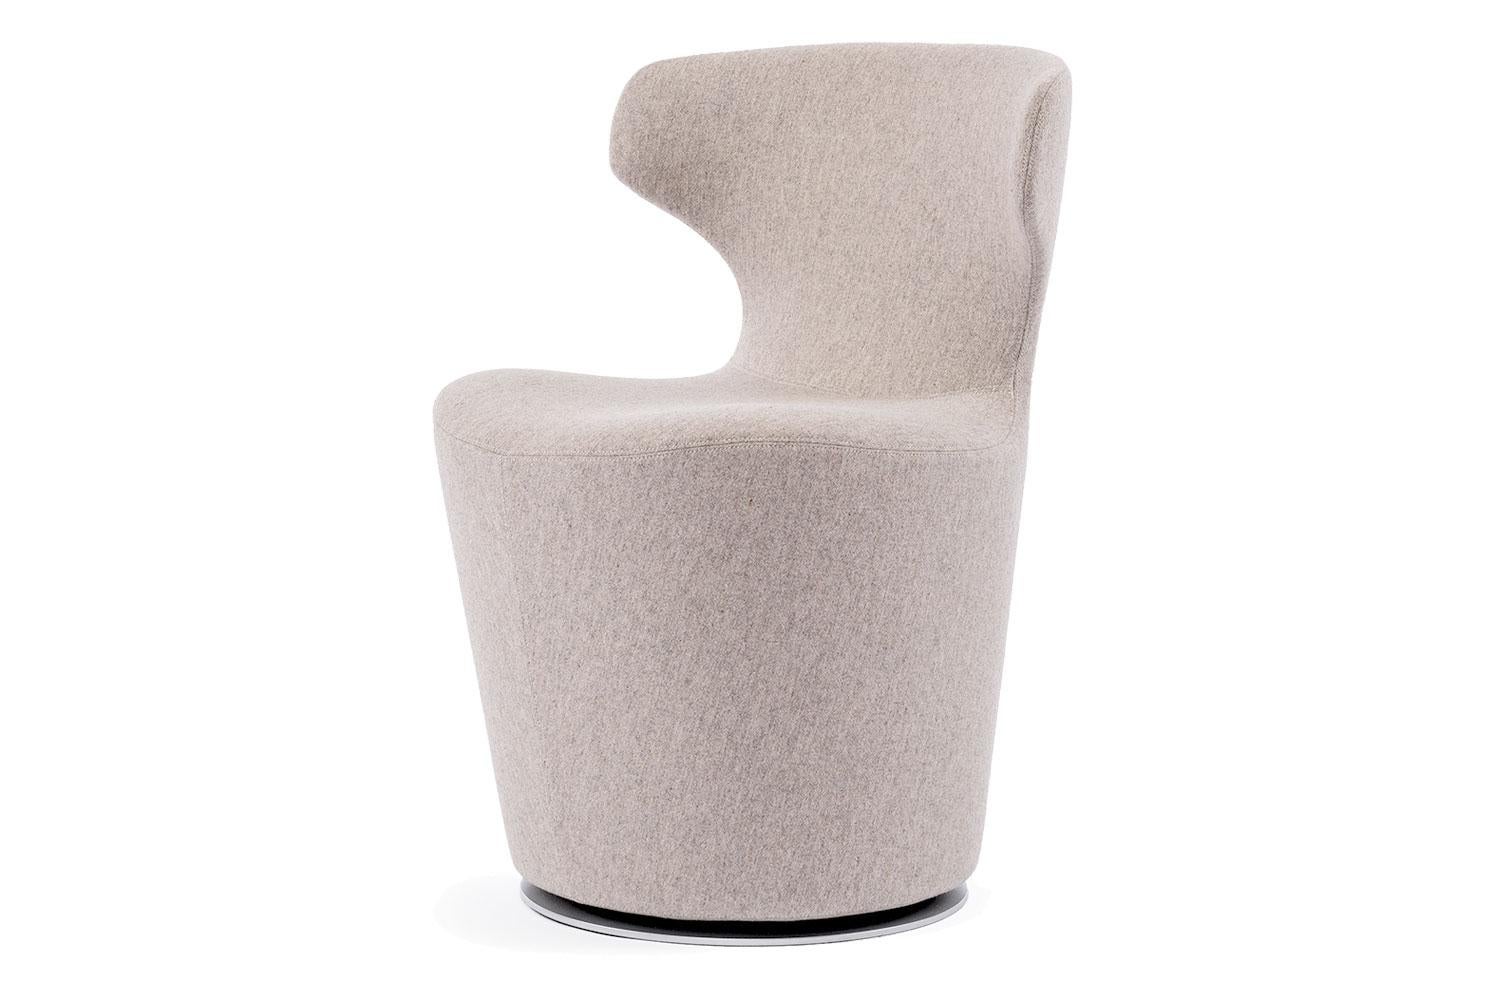 Italian Neutral Wool Cashmere Upholstered Swivel Armchair by B&B Italia - Available Now